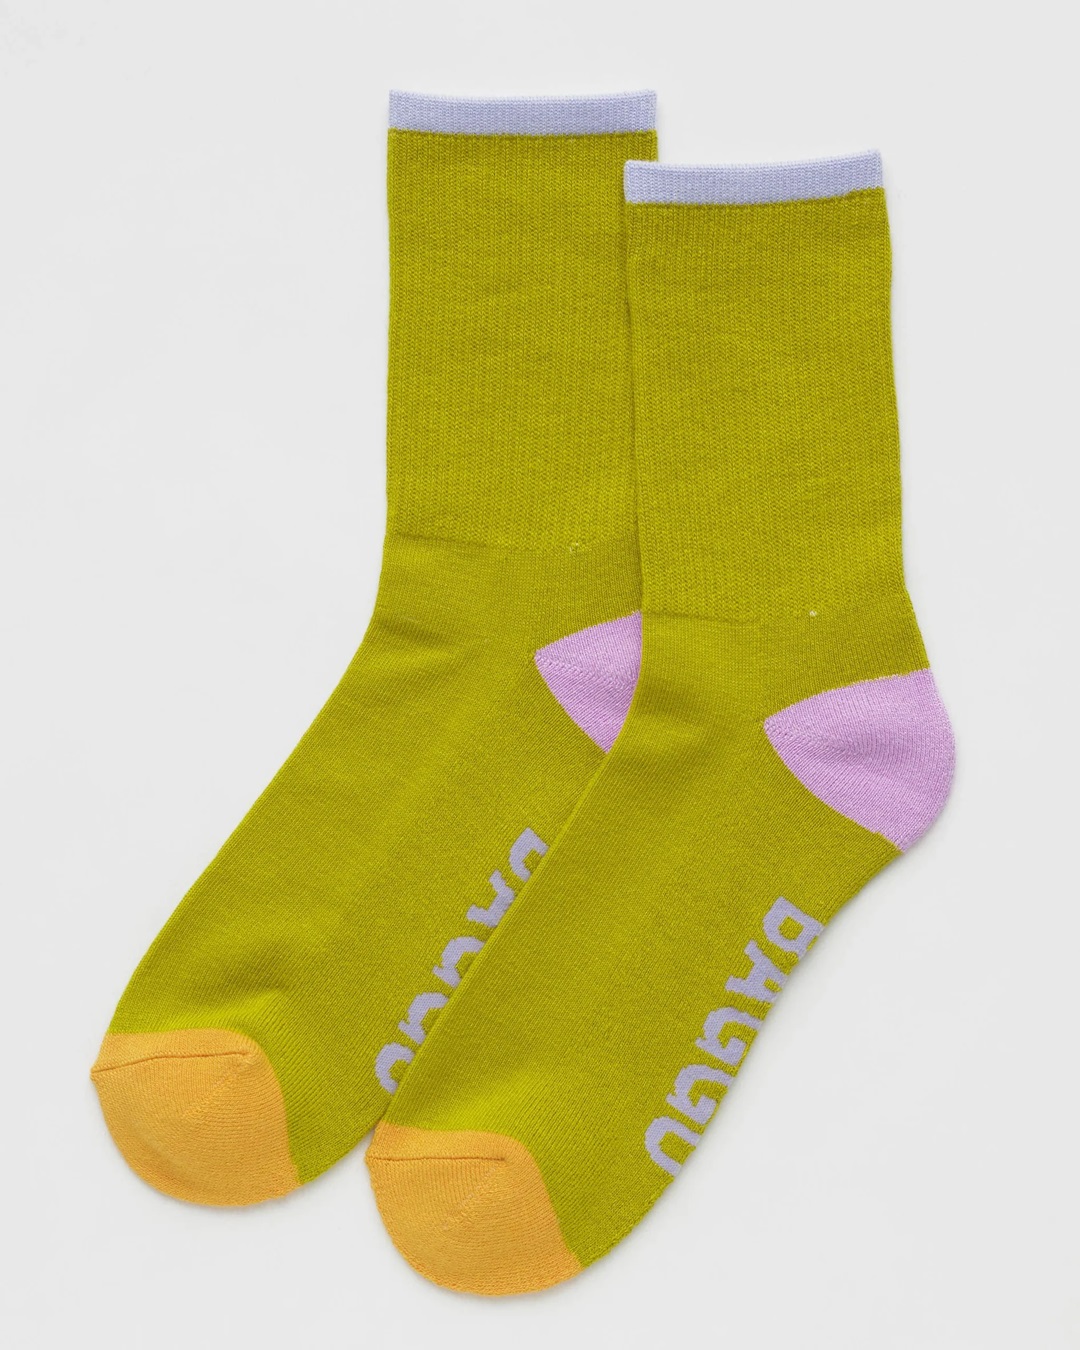 Citron pair of socks with pink coloured toes and orange heels